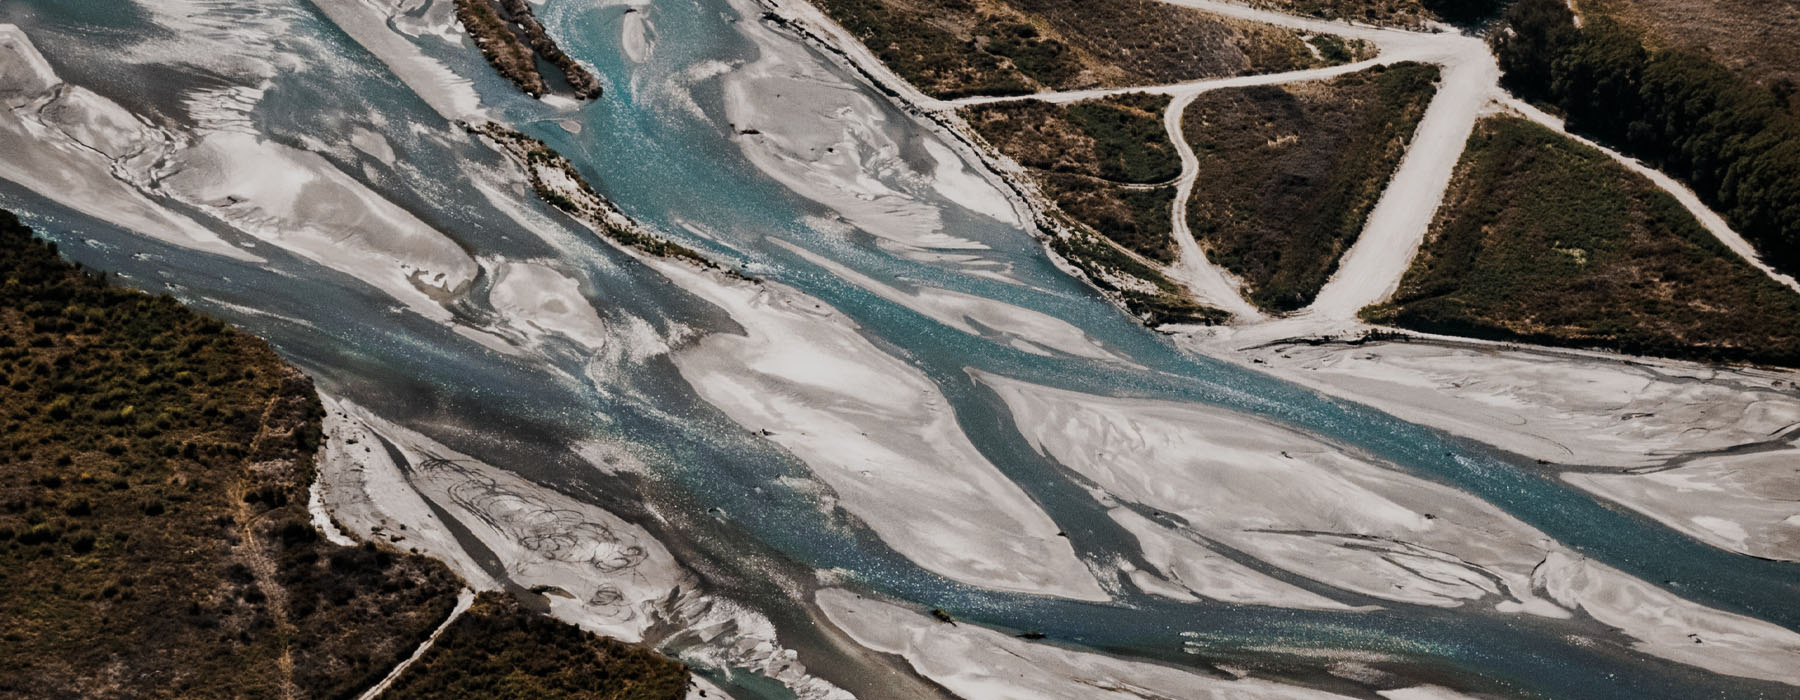 Aerial photo of the braided bed of the Shotover River